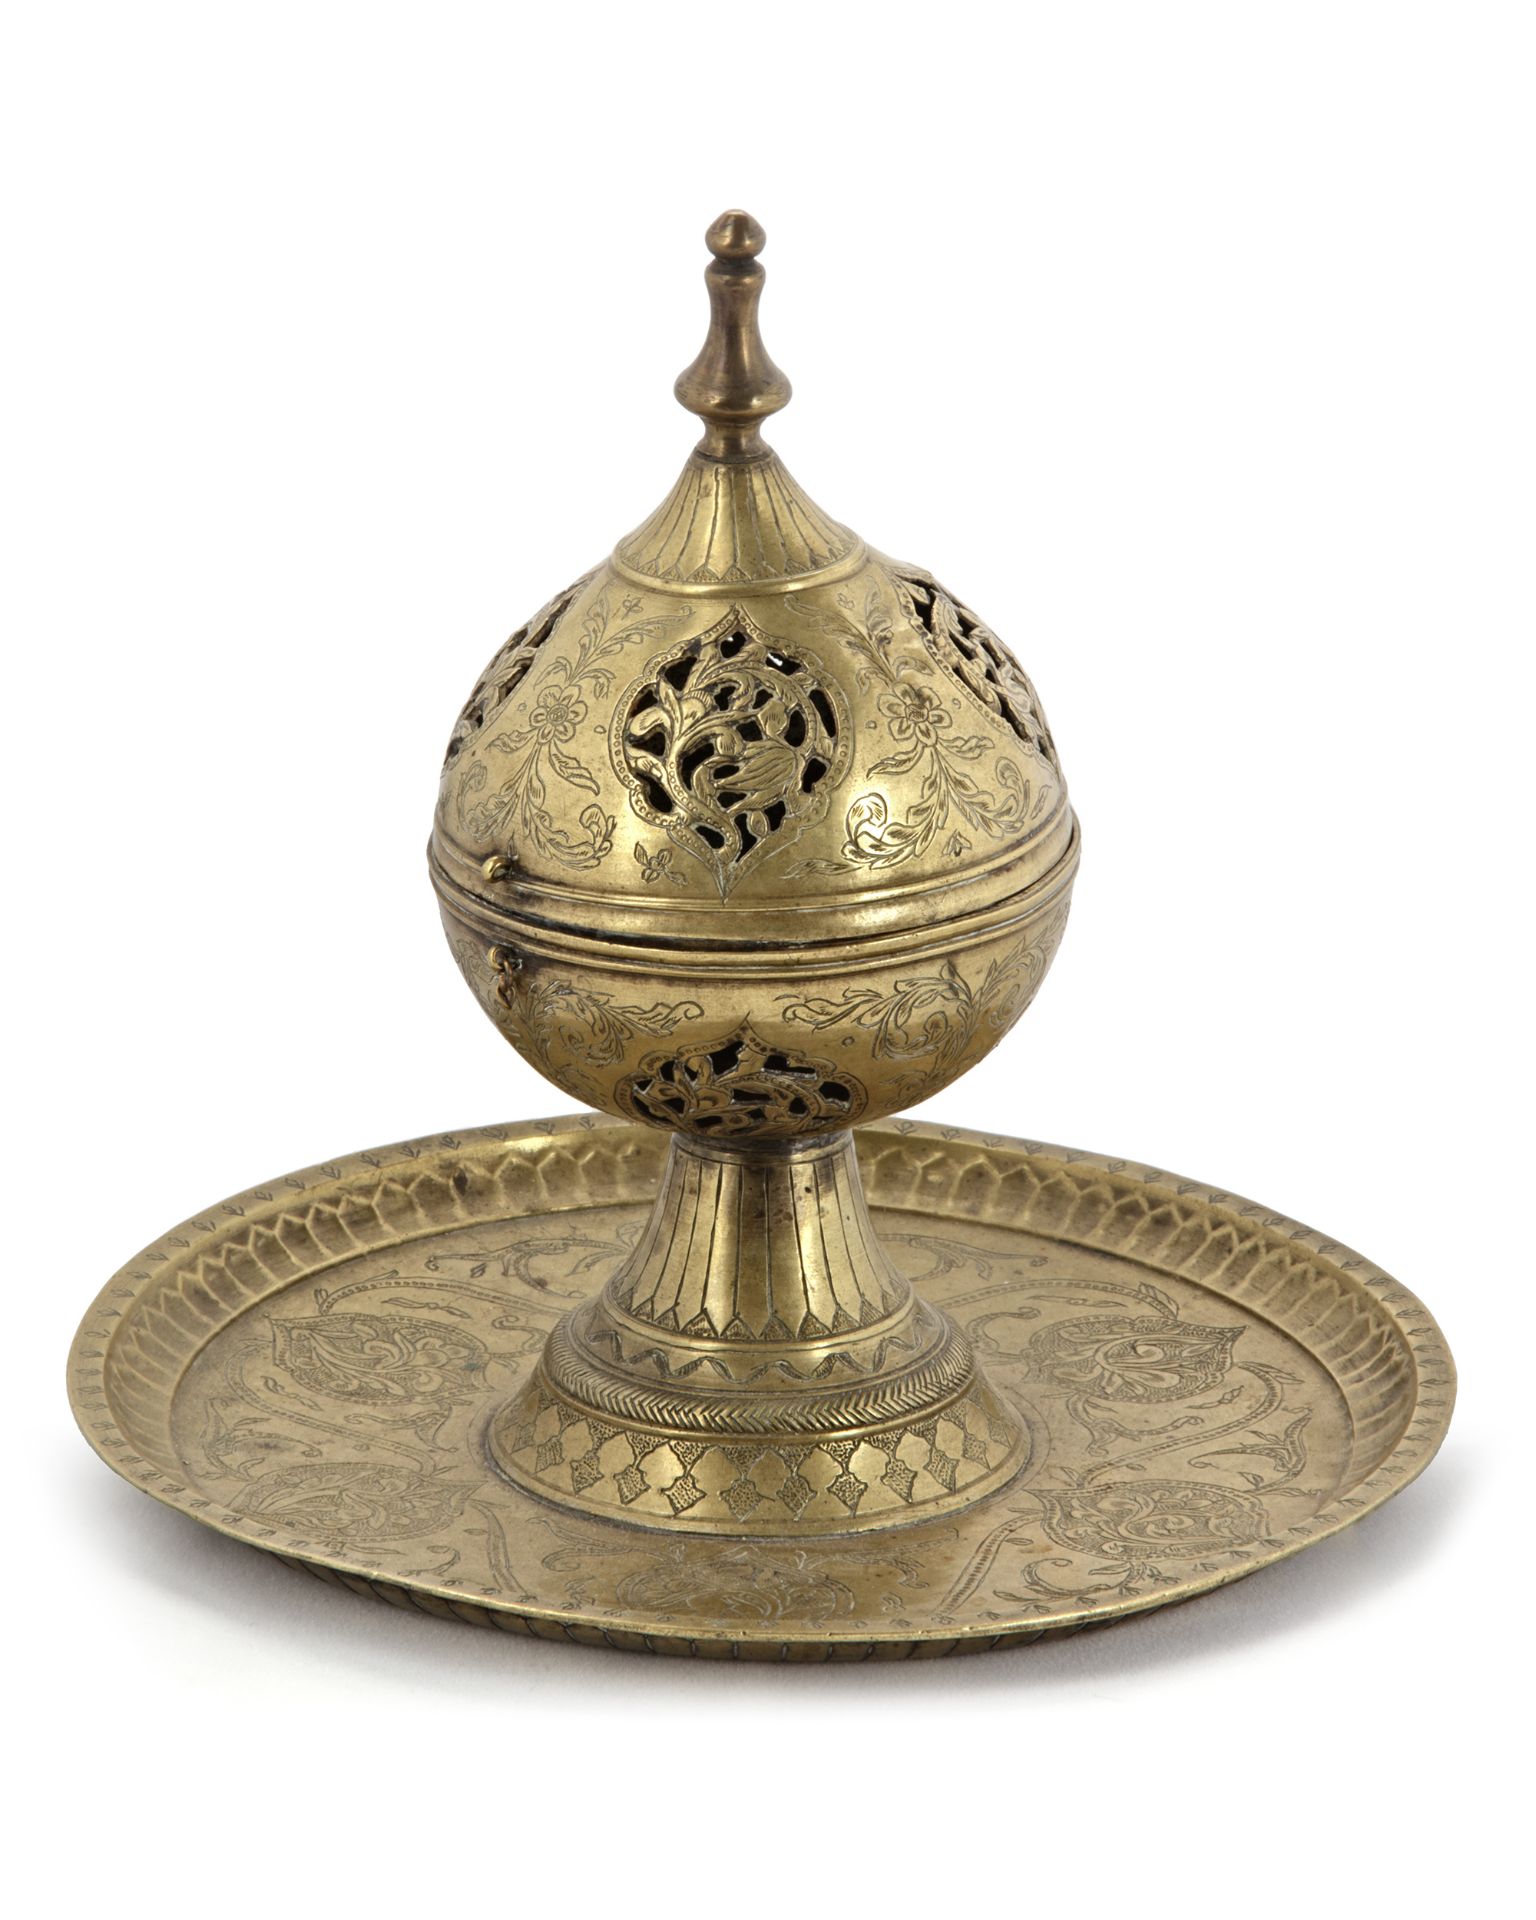 A BRASS INCENSE BURNER, DECCAN, 16TH CENTURY - Image 5 of 10